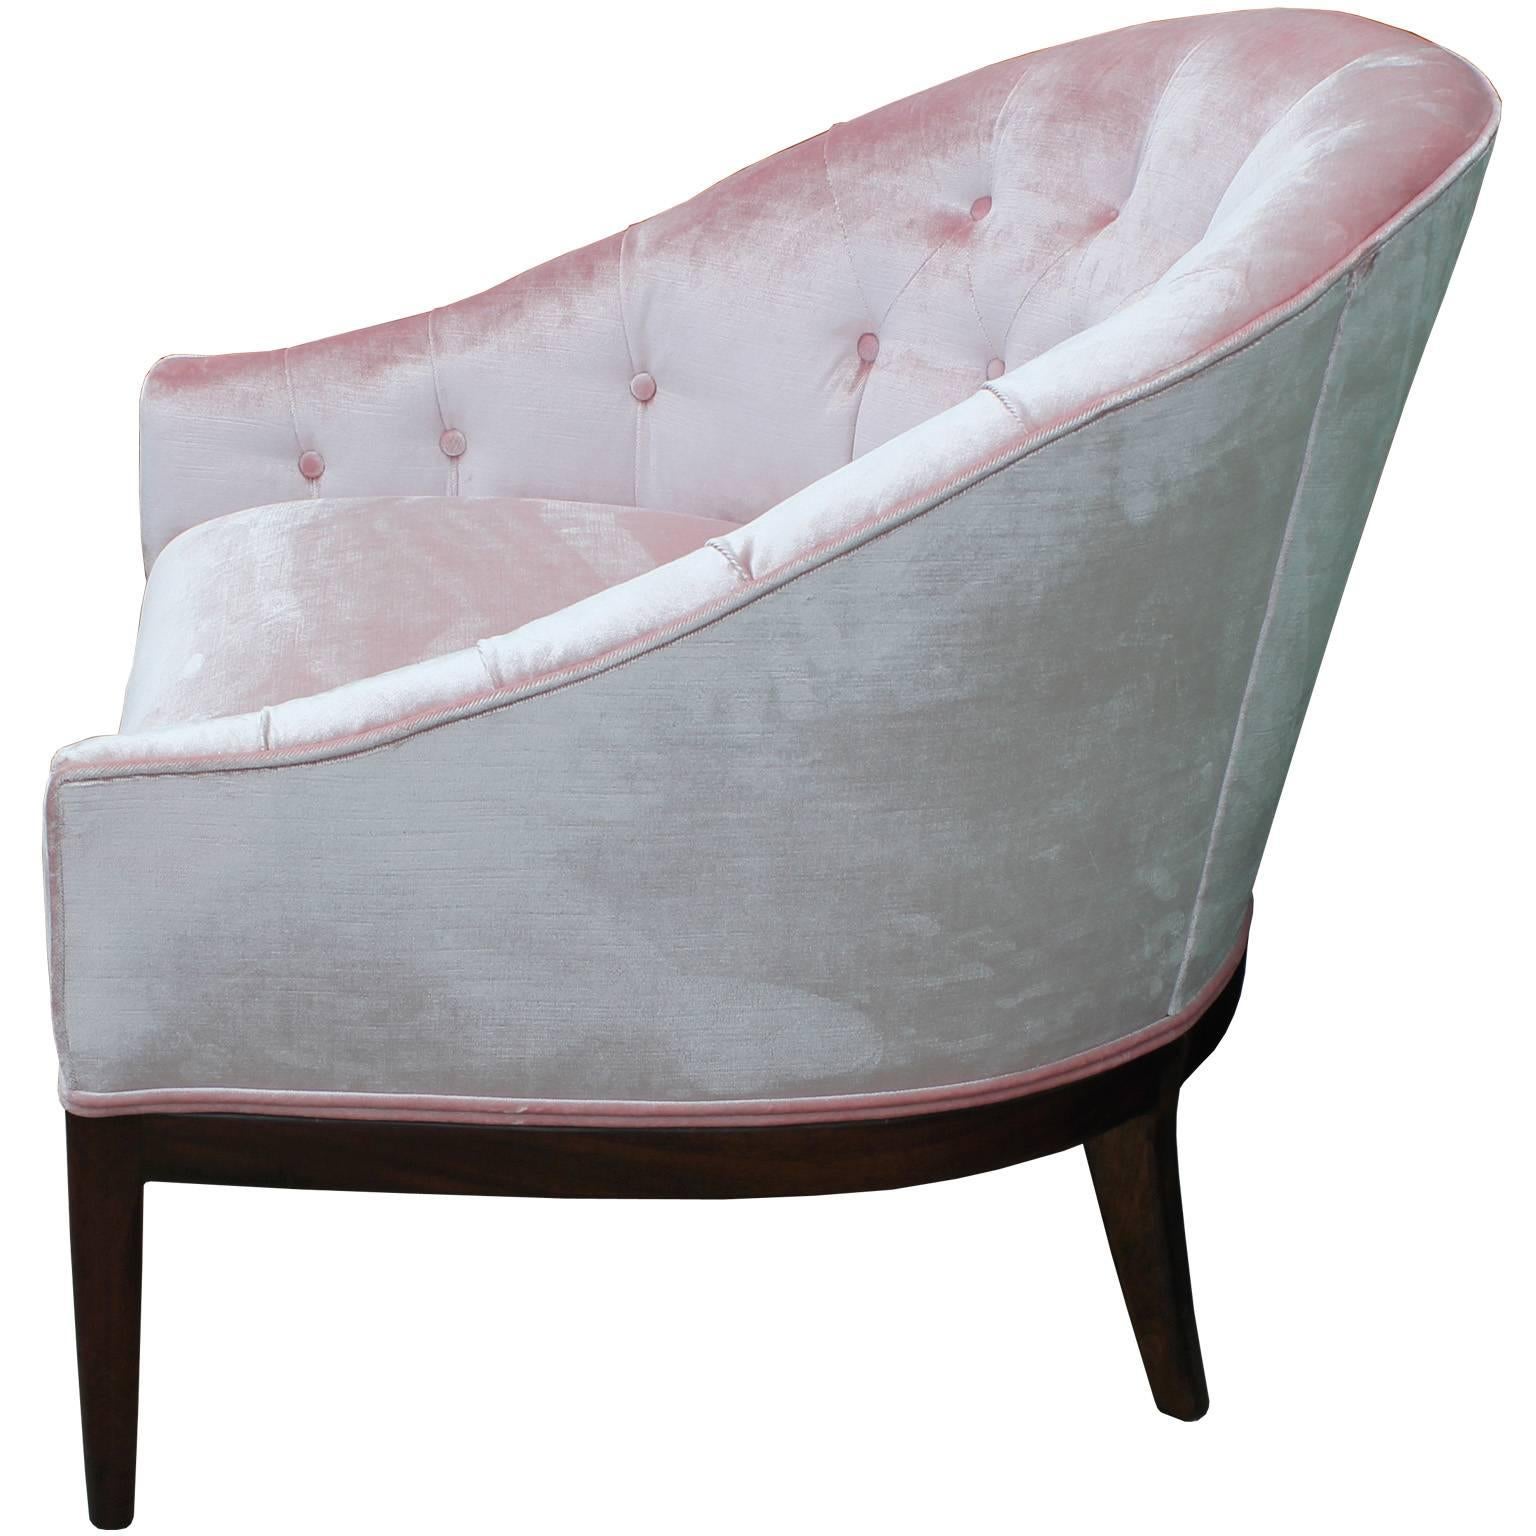 North American Luxe Pair of Modern Tufted Barrel Back Chairs in Ballet Pink Velvet and Walnut